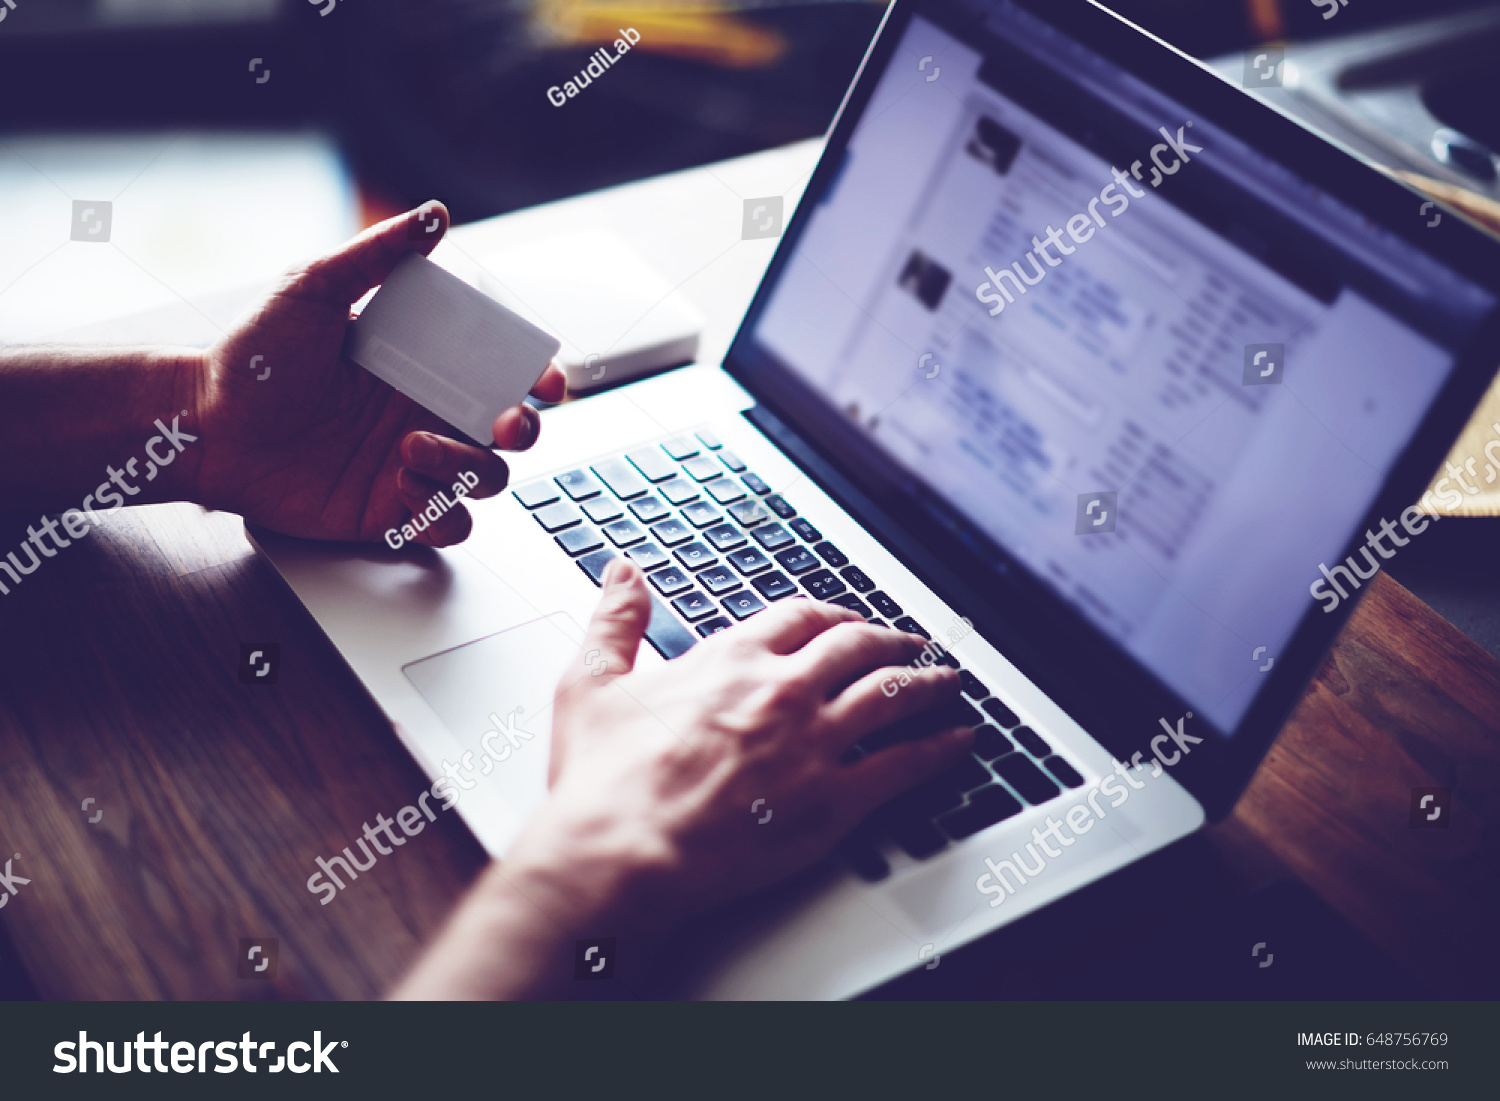 Cropped shot of a man's hands using a laptop at home while holding credit card in the hands, online shopping at home, cross process, filtered image #648756769